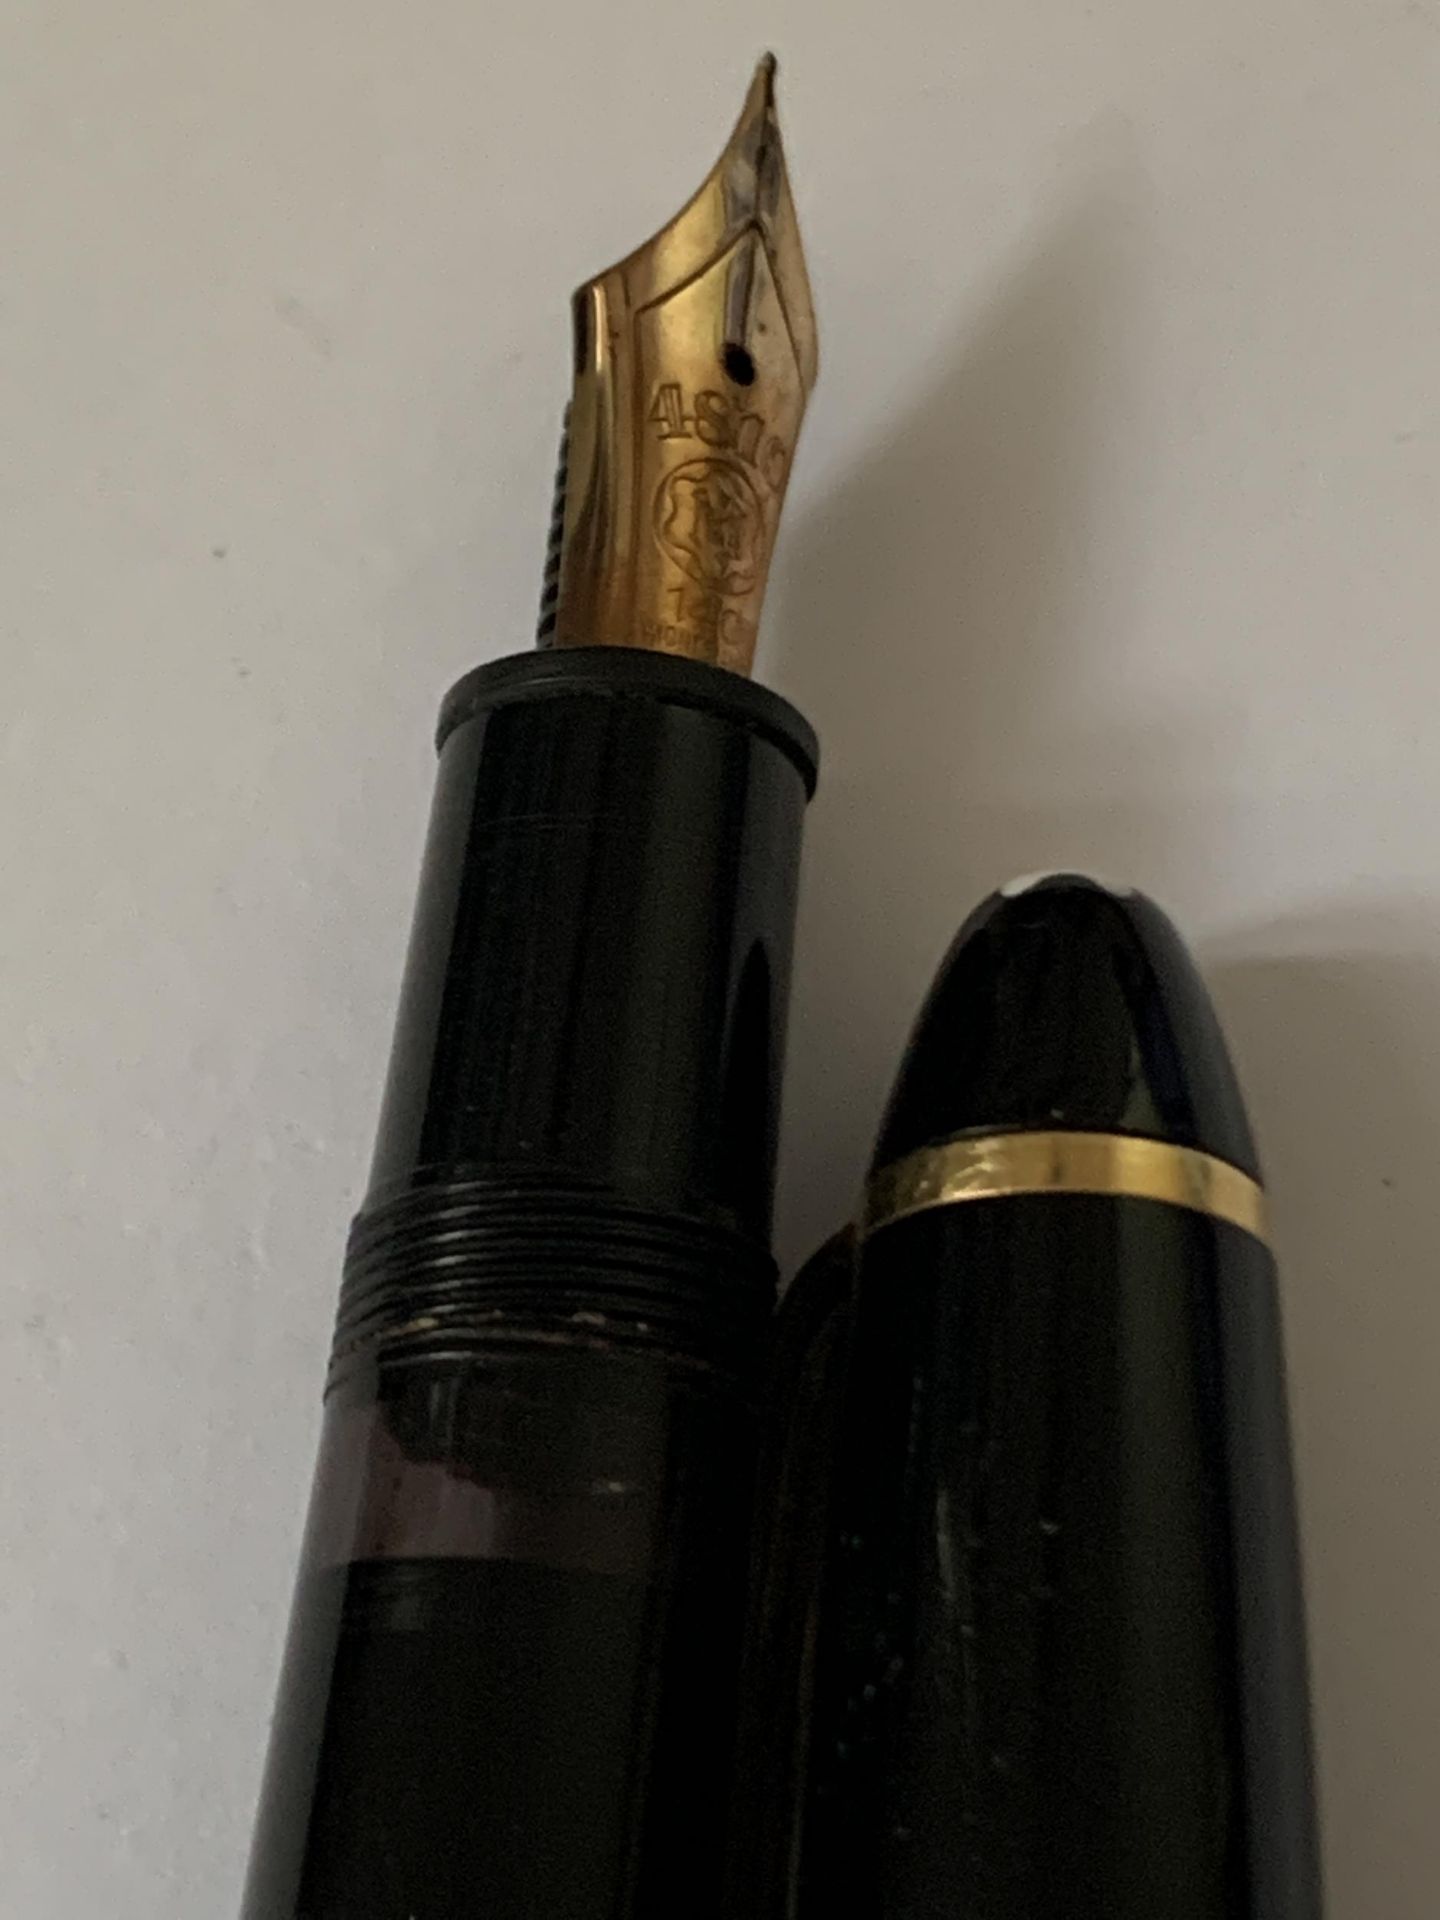 A MONT BLANC MEISTERSTUCK GOLD COATED LE GRAND FOUNTAIN PEN WITH 18 CARAT GOLD MEDIUM NIB - Image 5 of 8